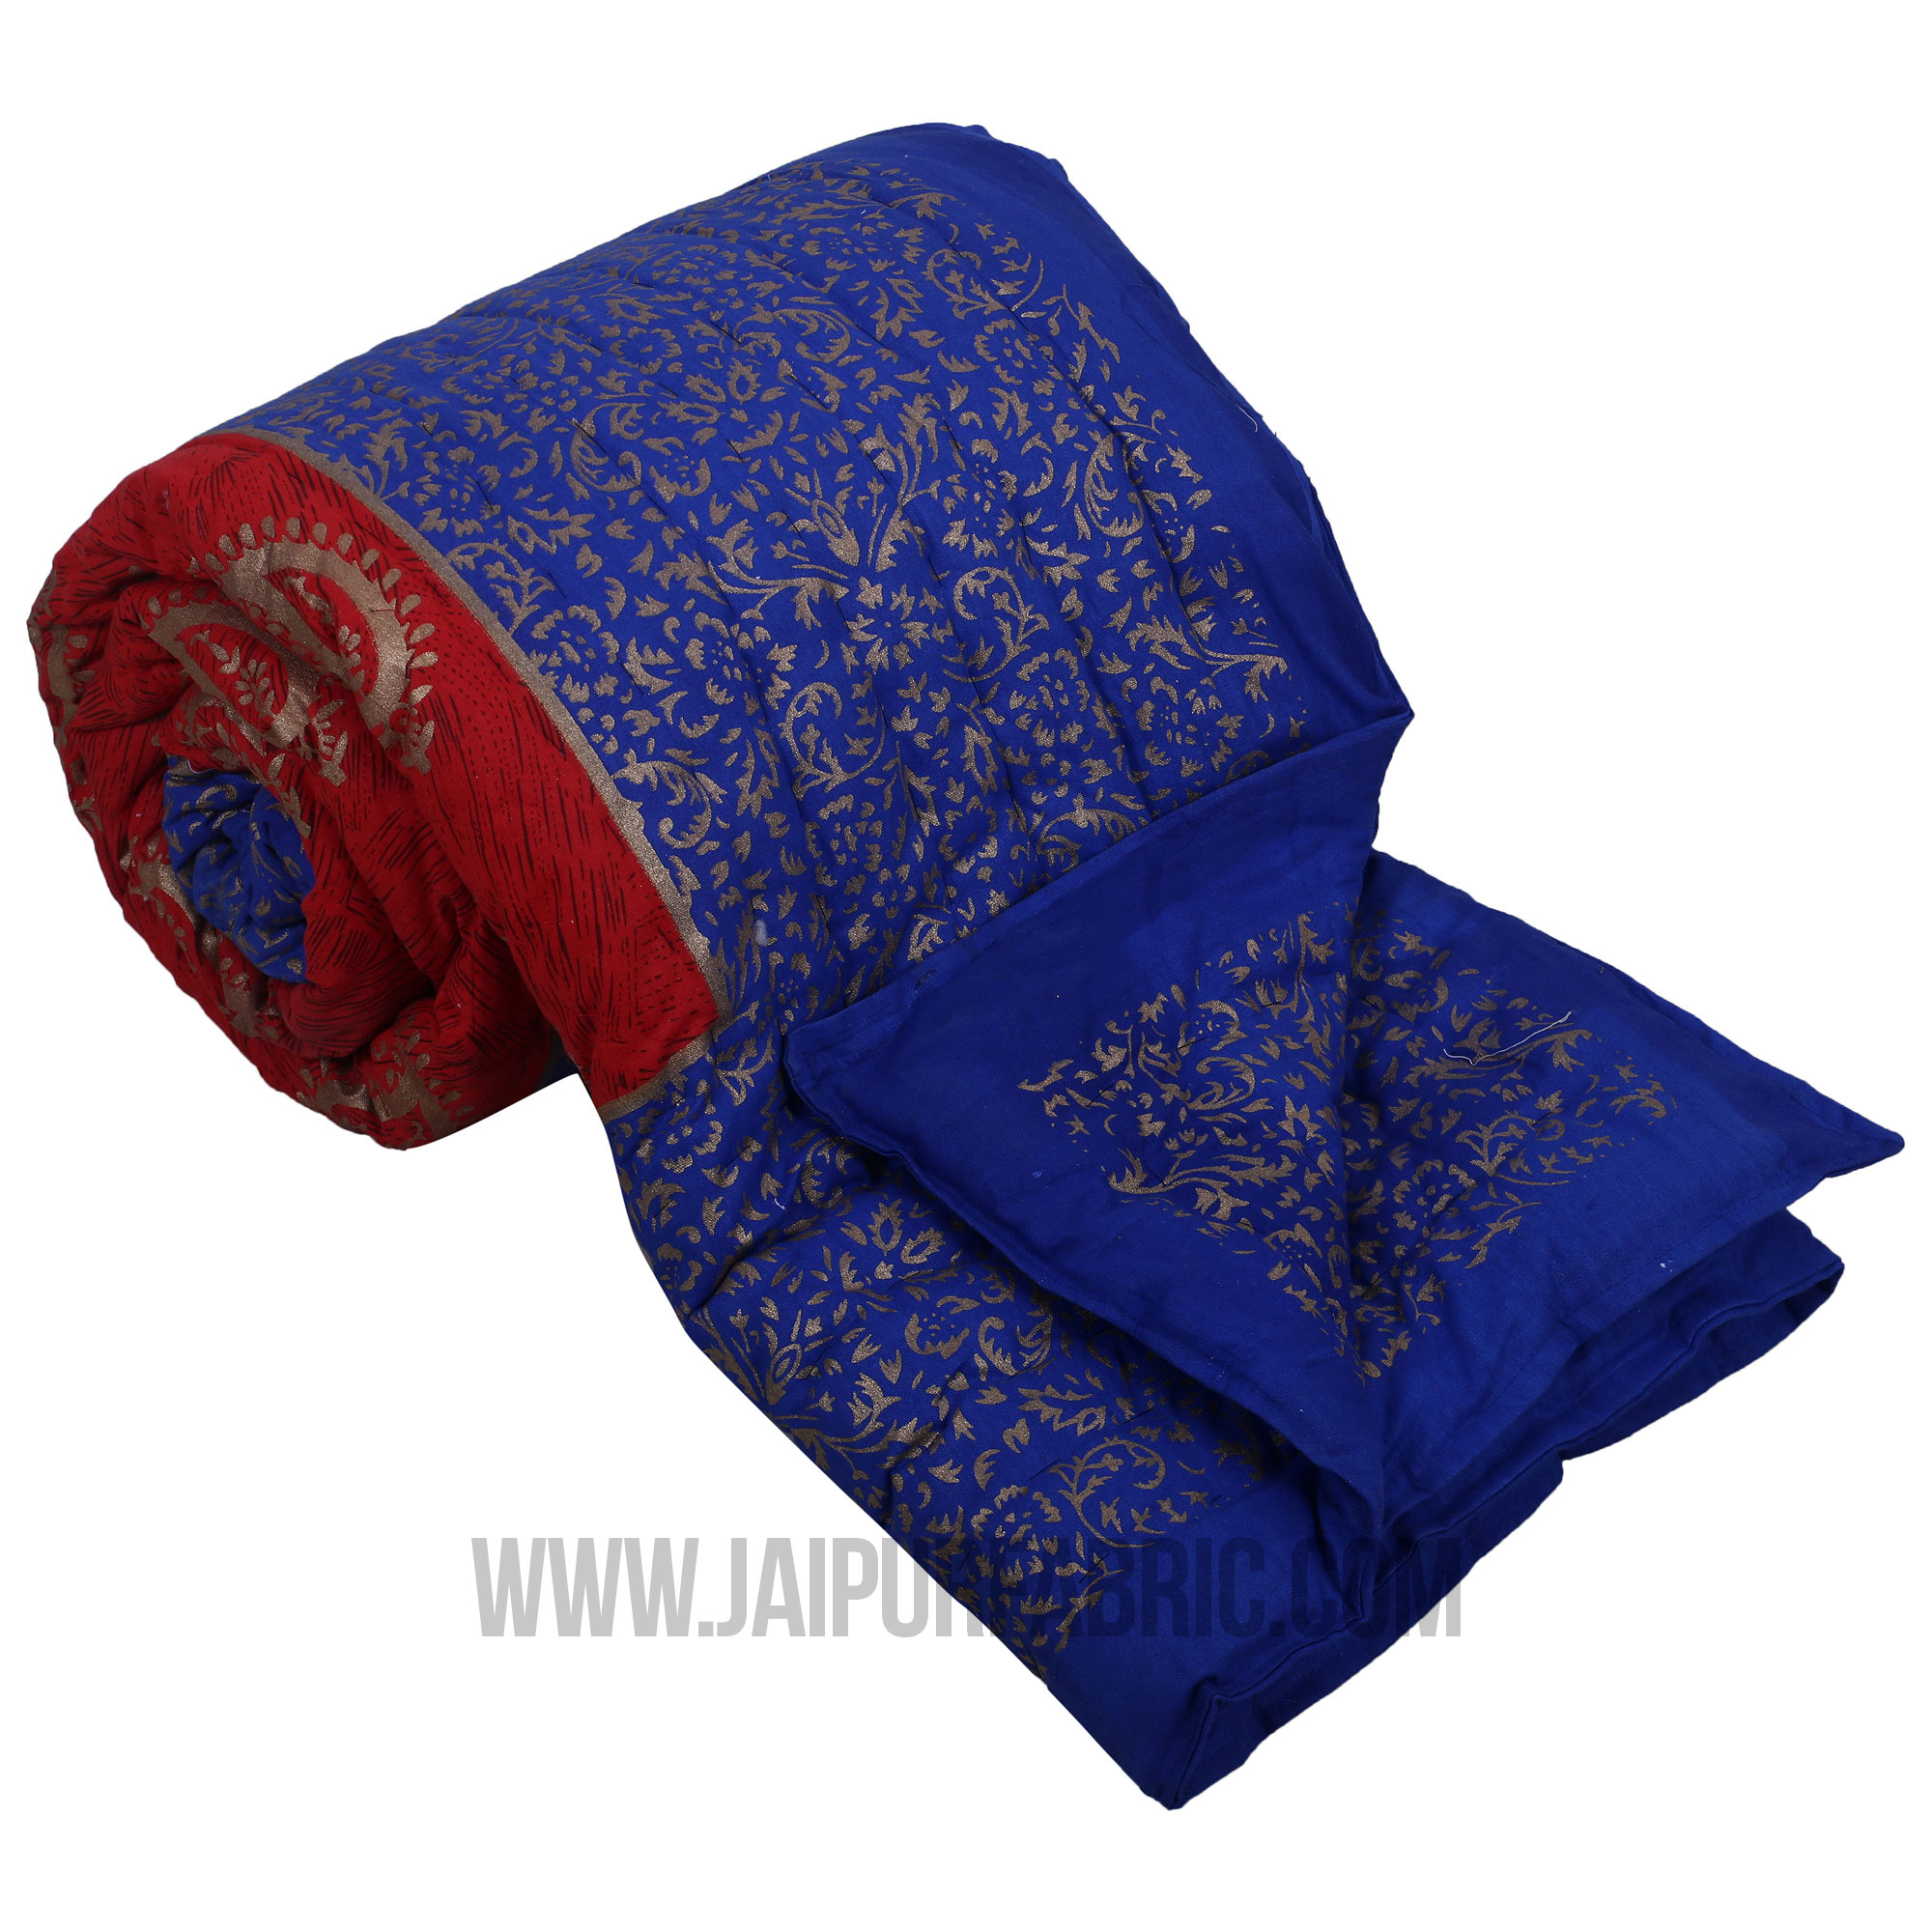 Jaipuri Printed Single Bed Razai Golden Red and blue with Paisley pattern